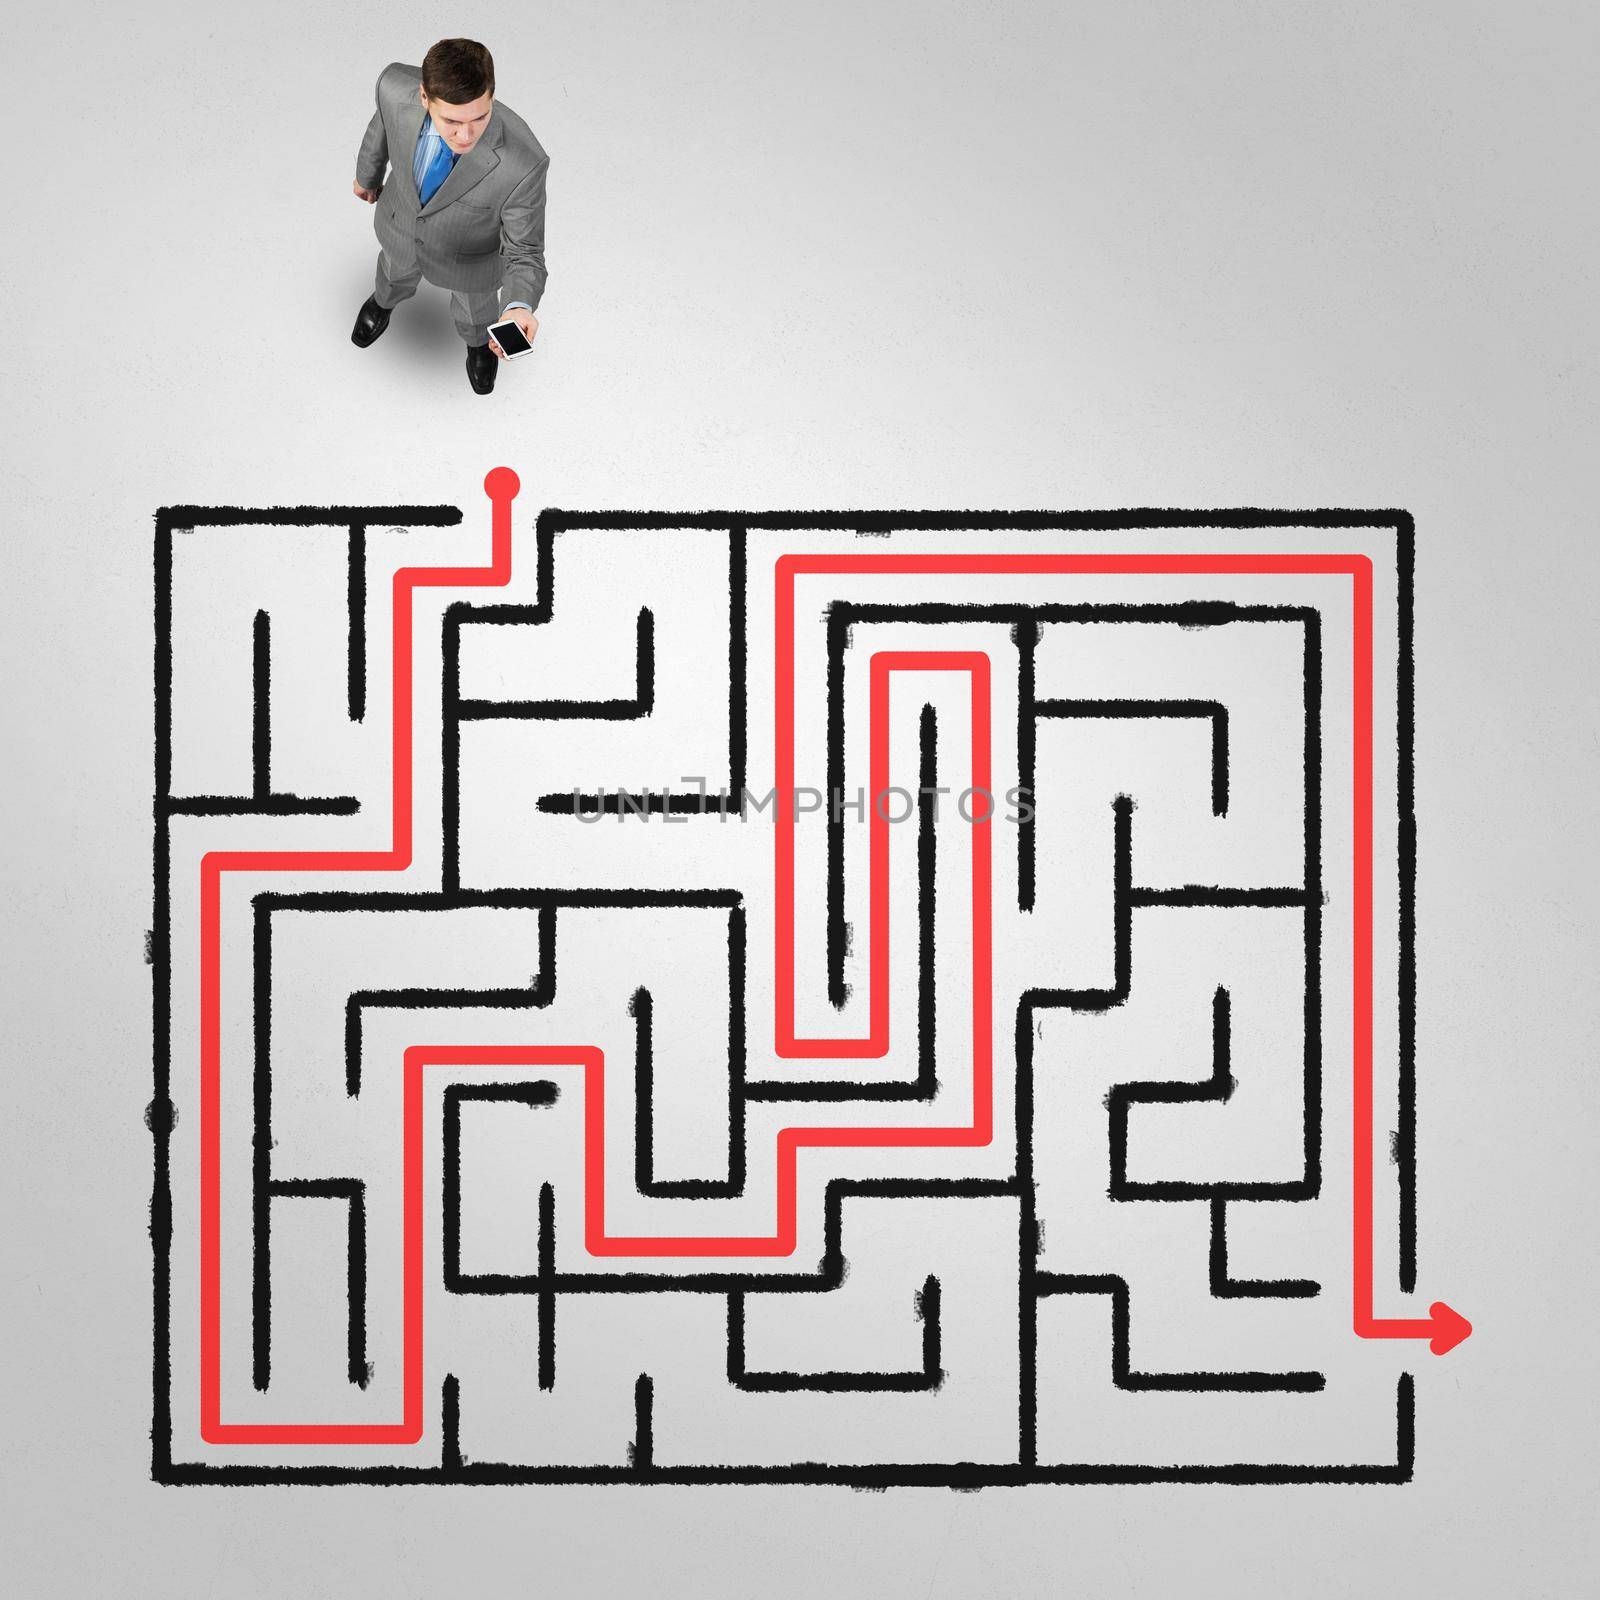 Top view of puzzled businessman looking at drawn maze on floor